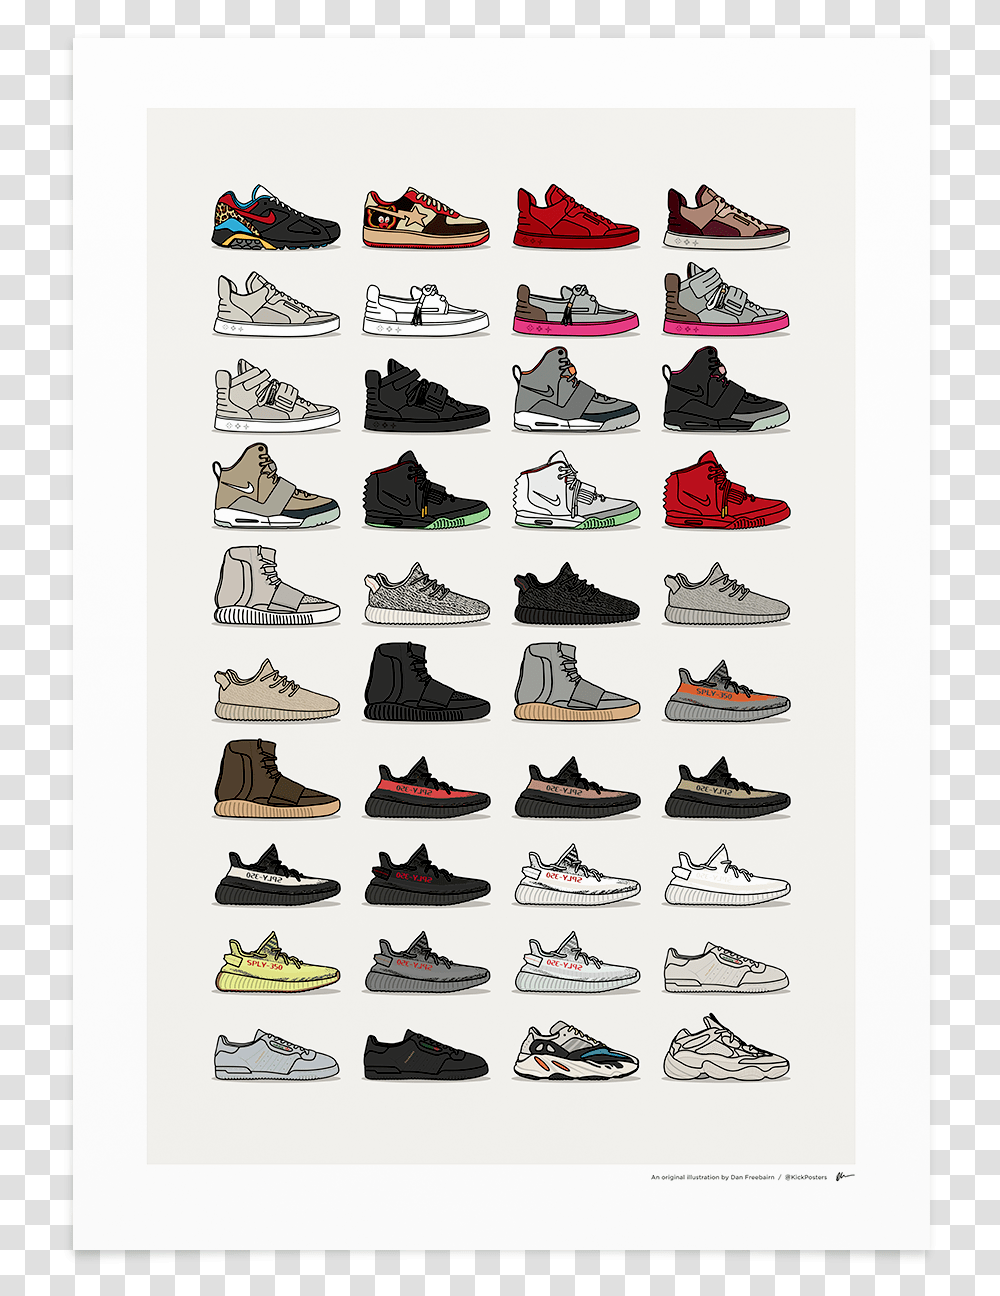 All The Yeezy Models, Apparel, Shoe, Footwear Transparent Png